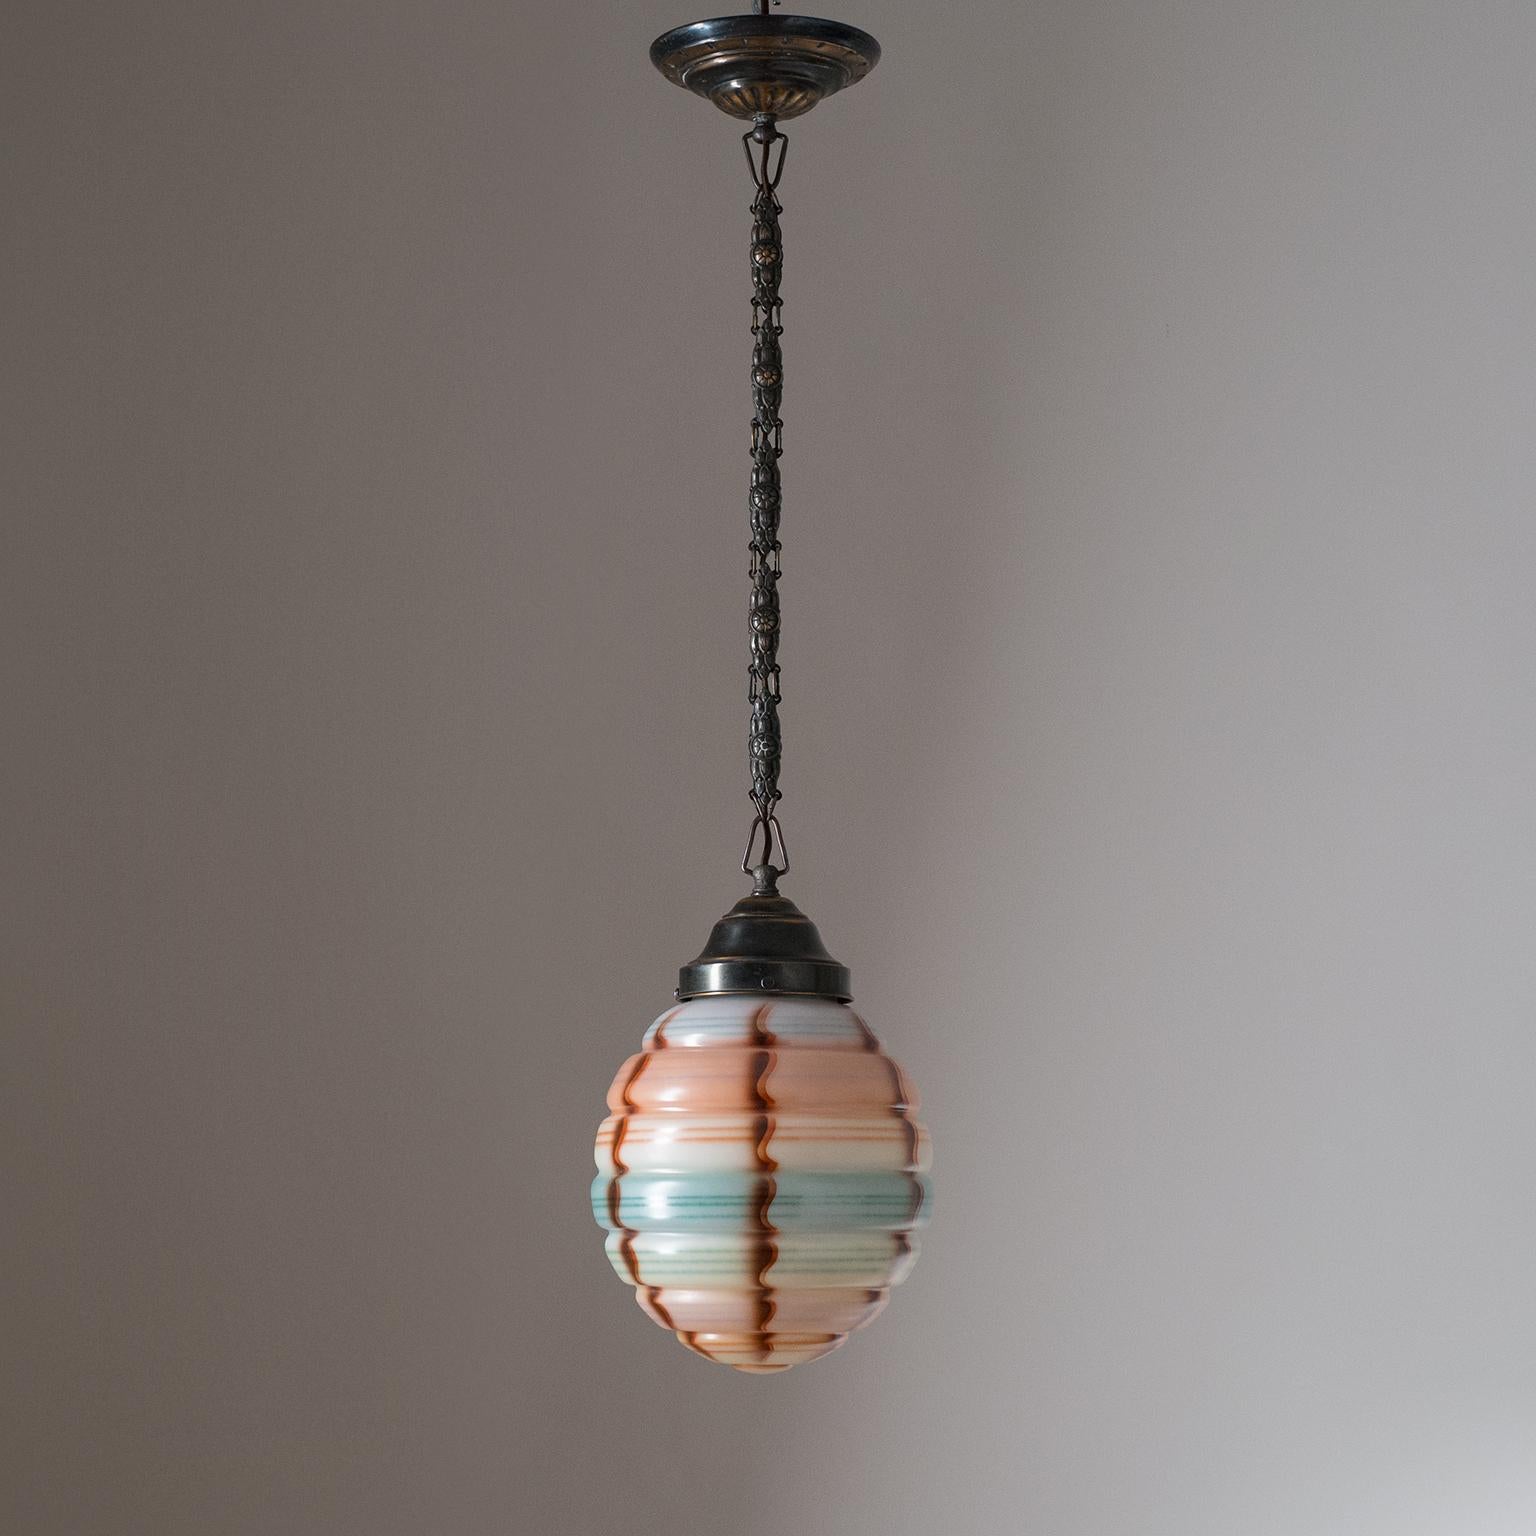 Rare Art Deco pendant or lantern from the 1920s. Very unique enameled glass diffuser with a multi-color aerographed (precurser to air-brush) decor. The intricate detailed hardware is in patinated copper. One original brass and ceramic E27 socket